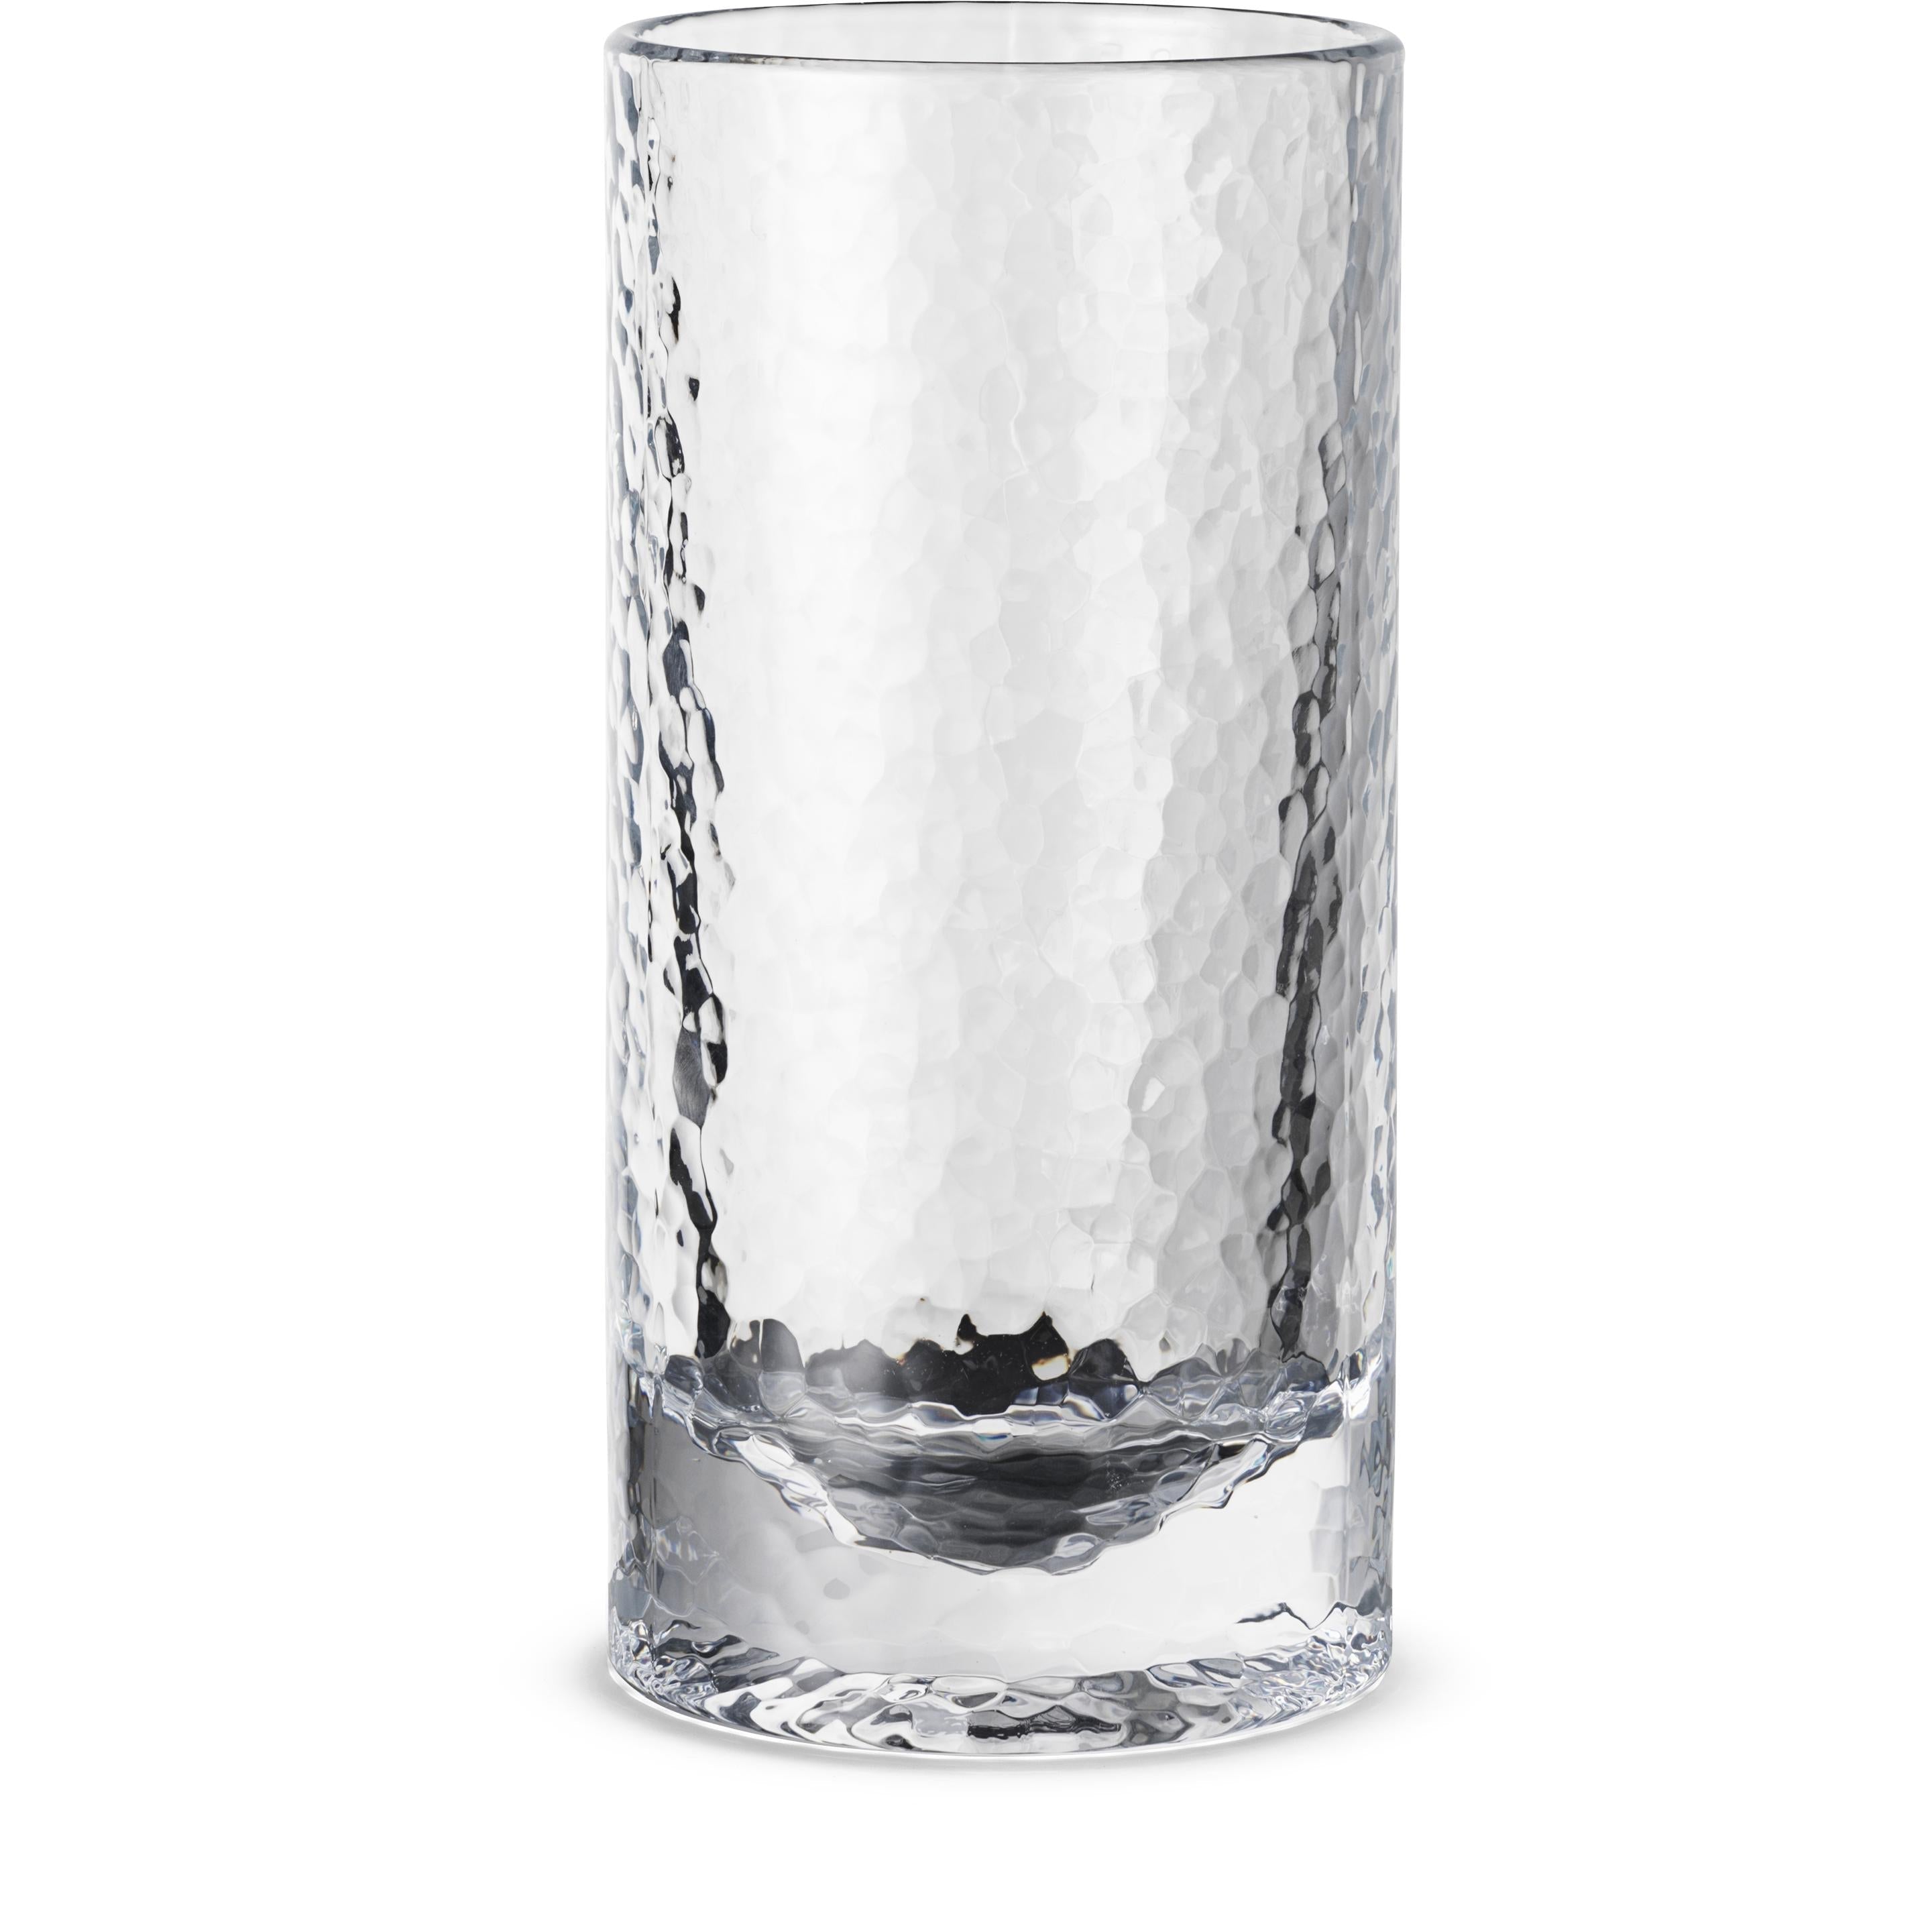 Holmegaard Forma Long Glass 32 Cl Clear, 2 Pcs.